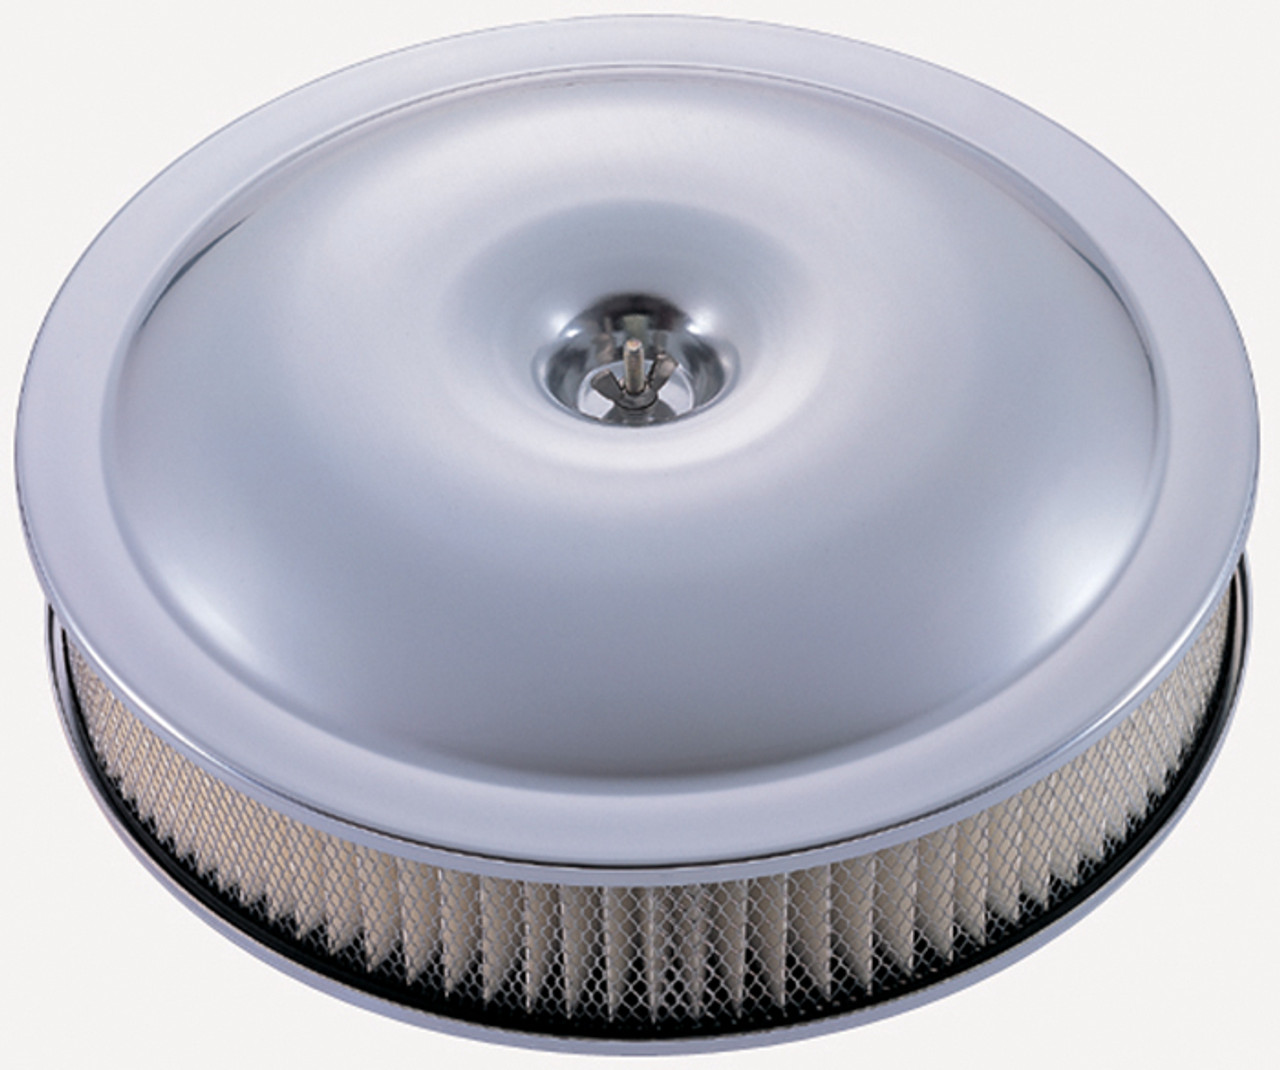 Proform 141-691 Air Cleaner - 14" x 3" - Clear Anodized Aluminum 1.5" Drop Base